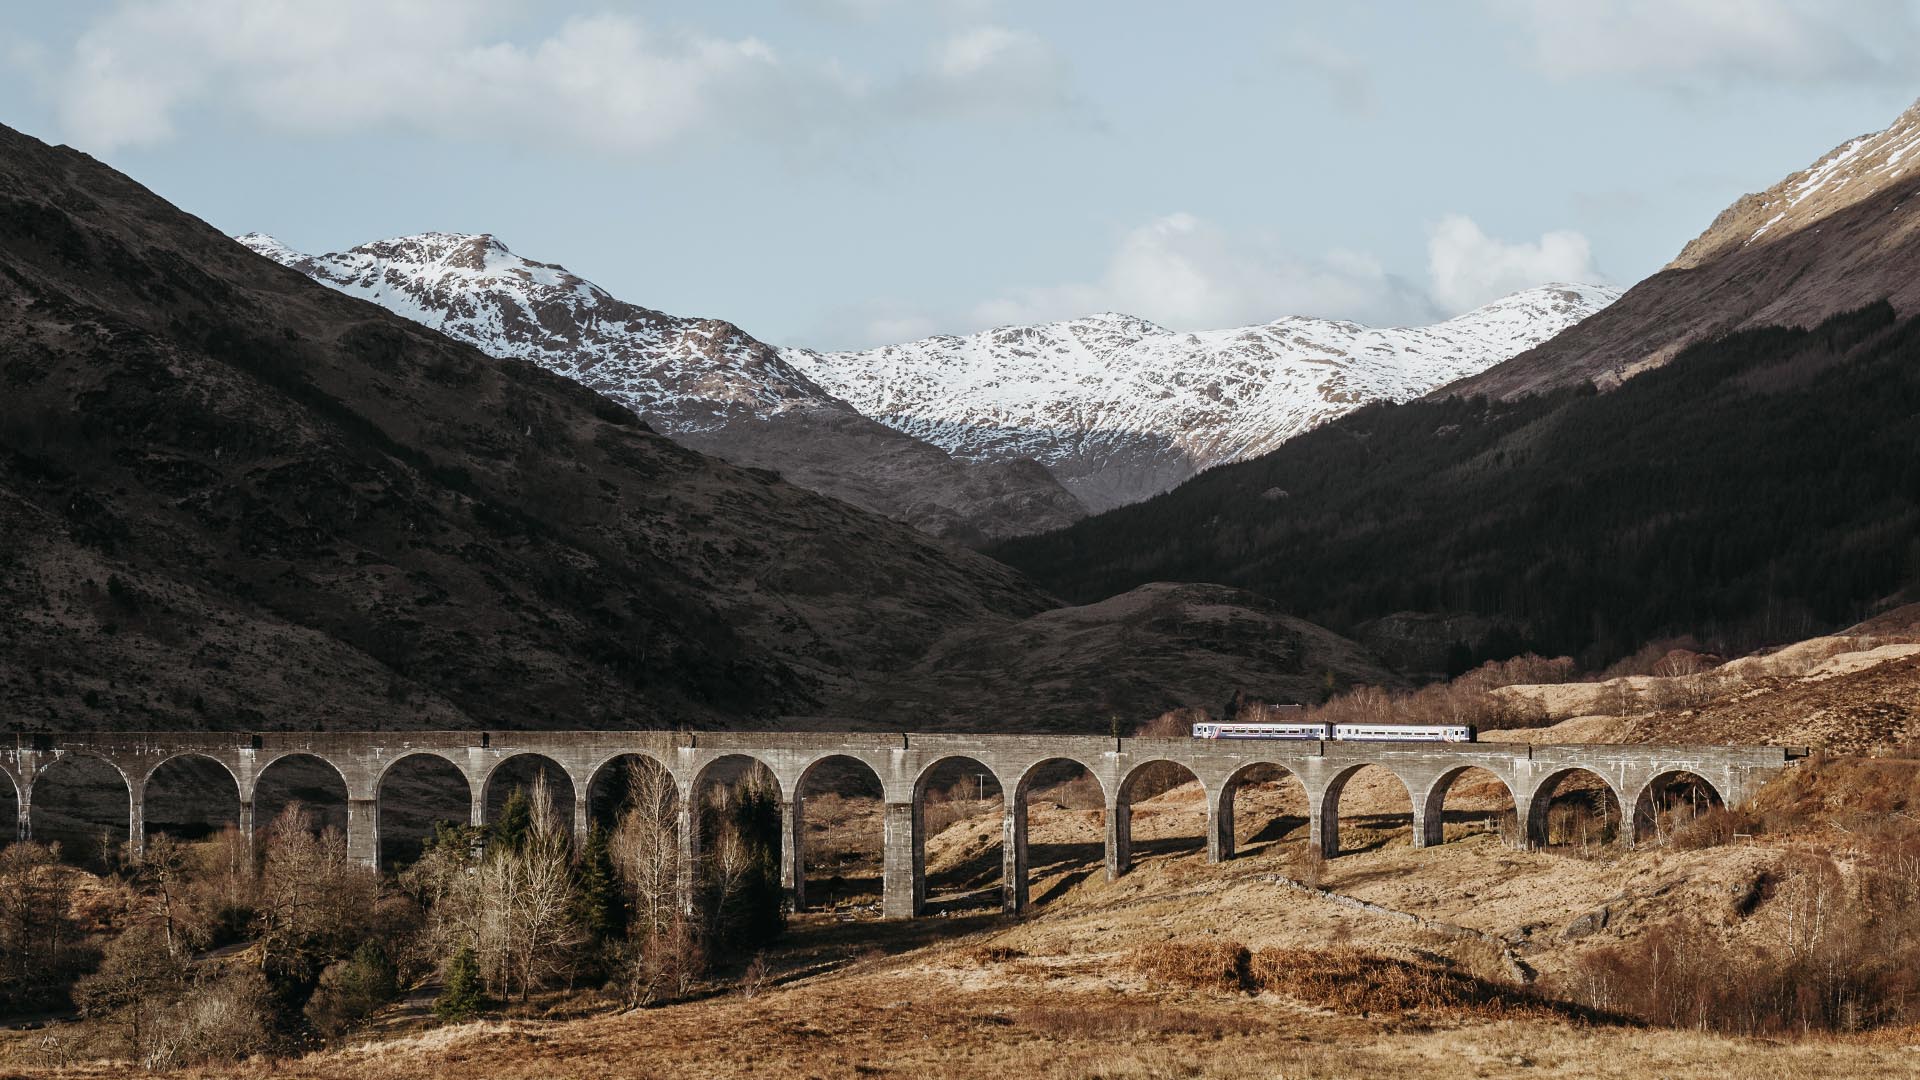 Glenfinnan Viaduct in Scotland with scot capped mountains behind the train passing over the bridge